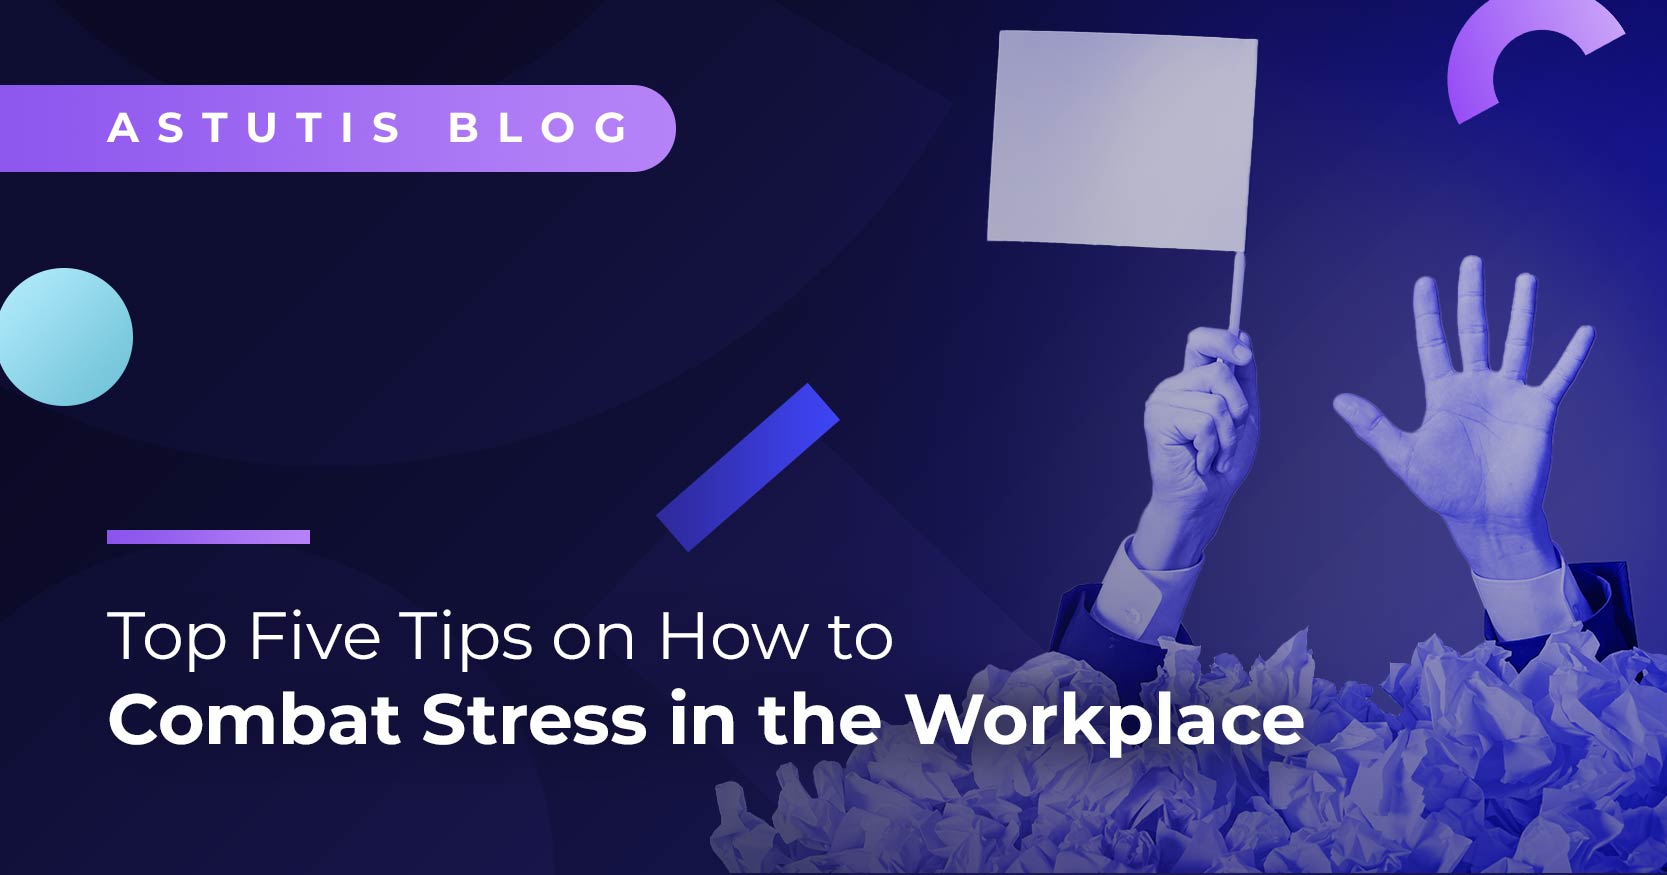 5 Tips on How to Reduce Stress in Work Image